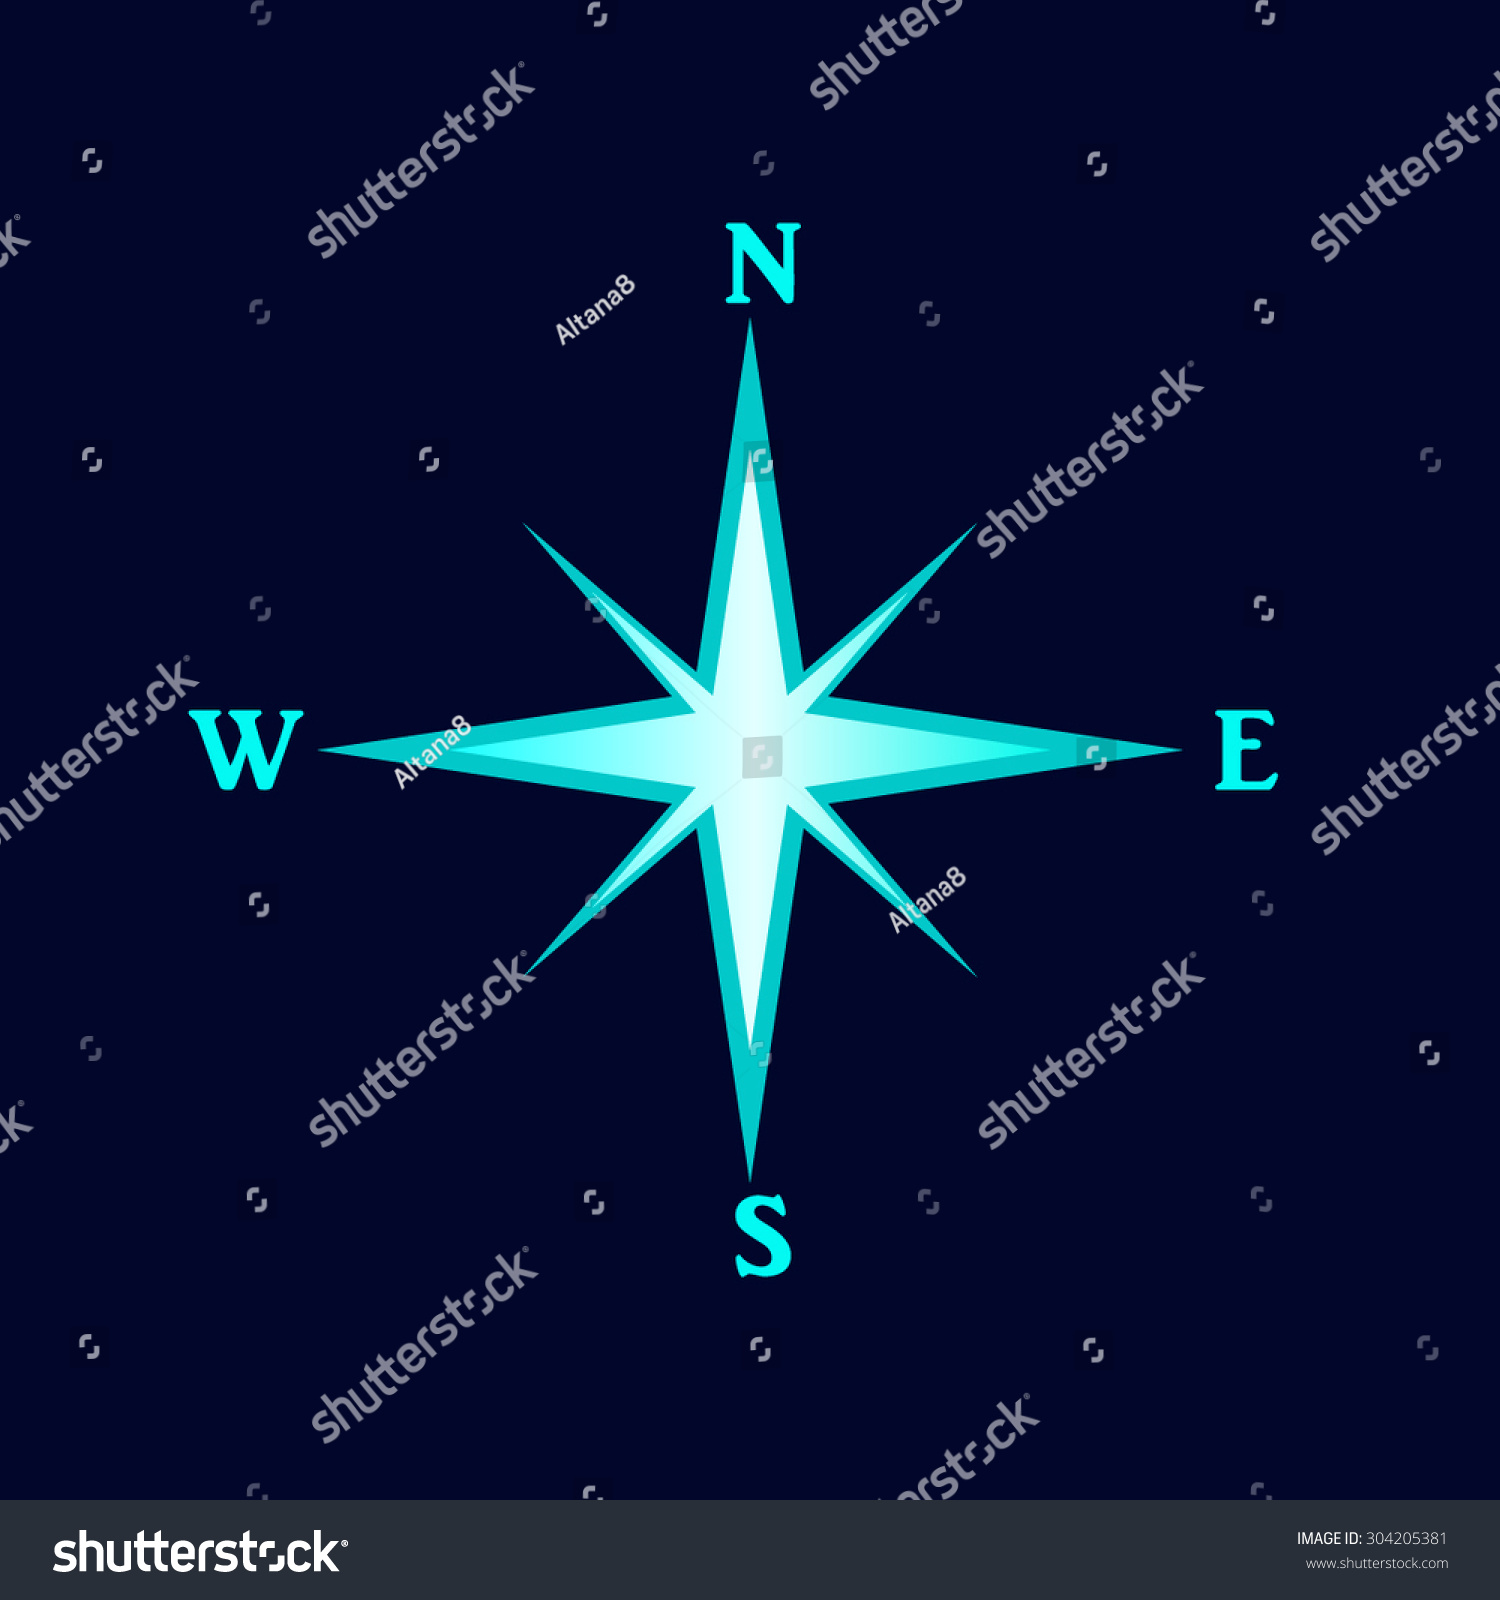 Illustration Compass Rose Stock Vector Royalty Free 304205381 1413